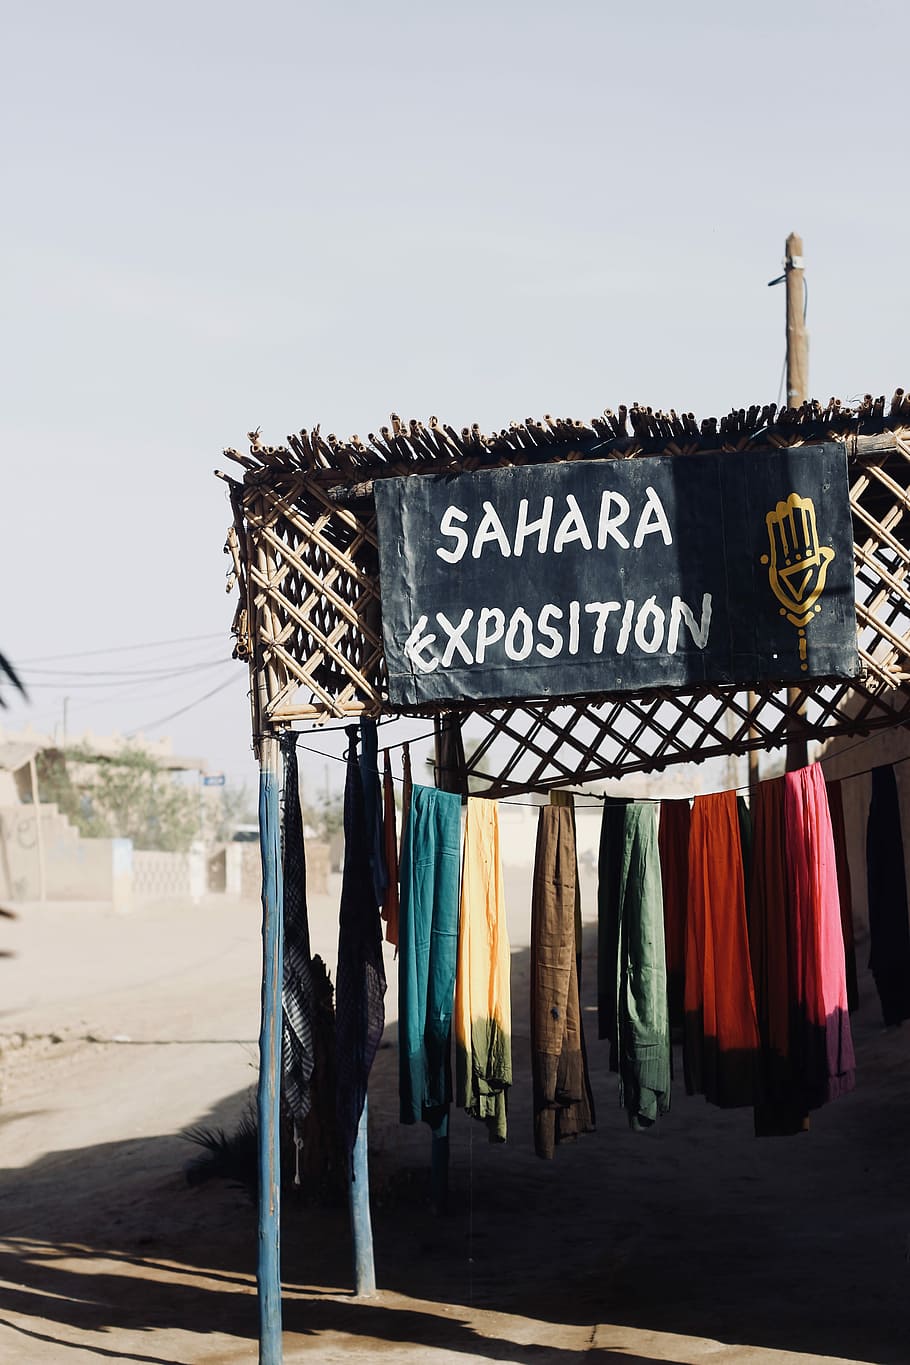 sahara exposition signage near assorted-color apparel on clothesline during daytime, assorted-color textiles hanging on clothesline